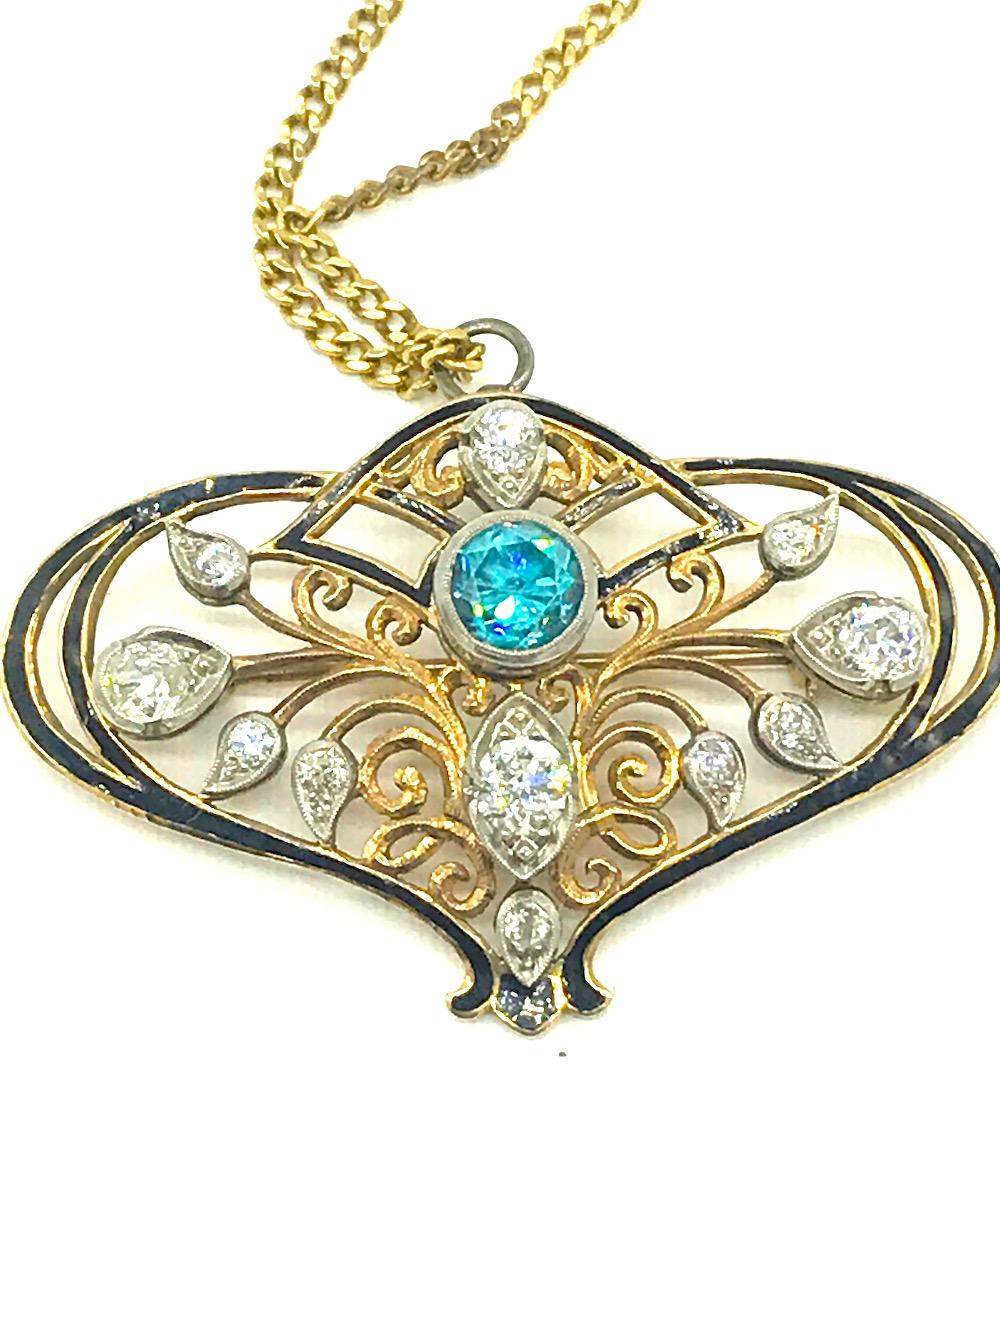 Art Deco Style pendant features European Cut diamonds set with a centered blue zircon.  The pendant measures
36 x 57 mm diameter and is accented with black enameled highlighting.  A lovely and large style pendant can be worn as a pin also as it is